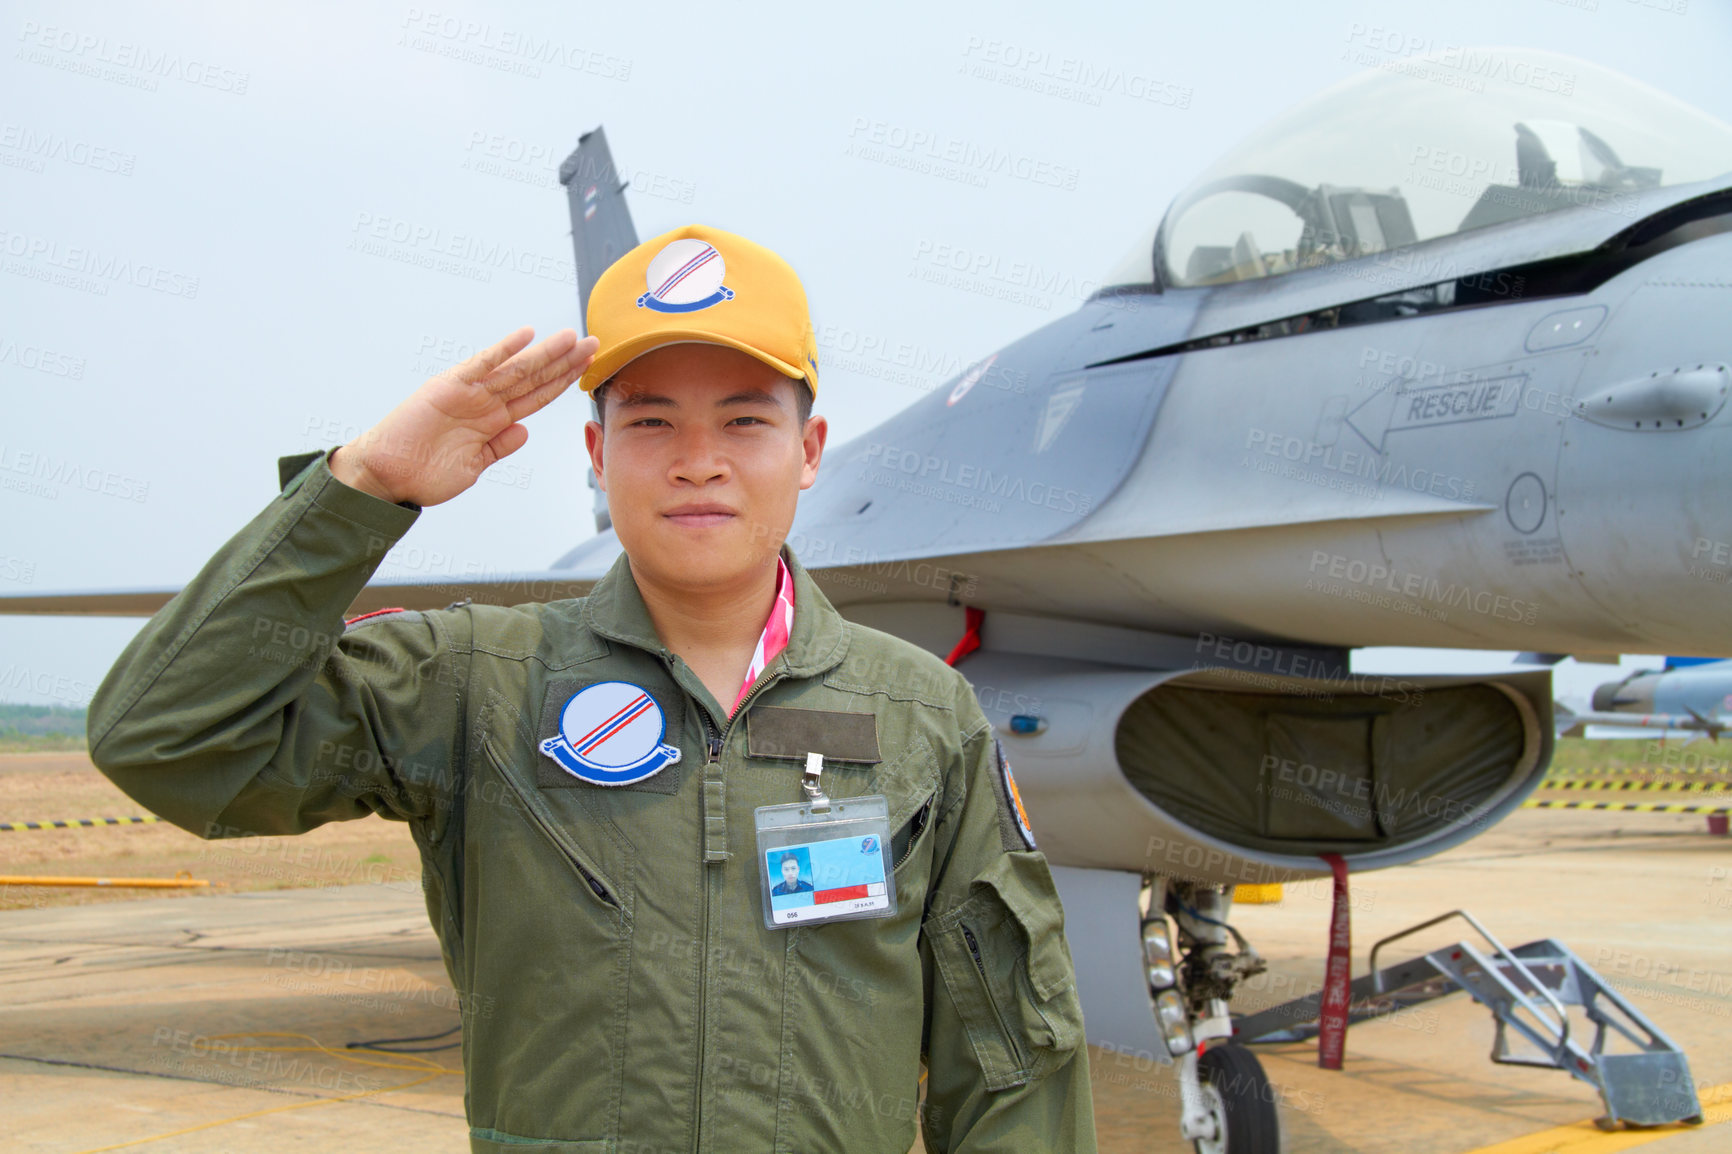 Buy stock photo A shot of a confident asian fighter pilot